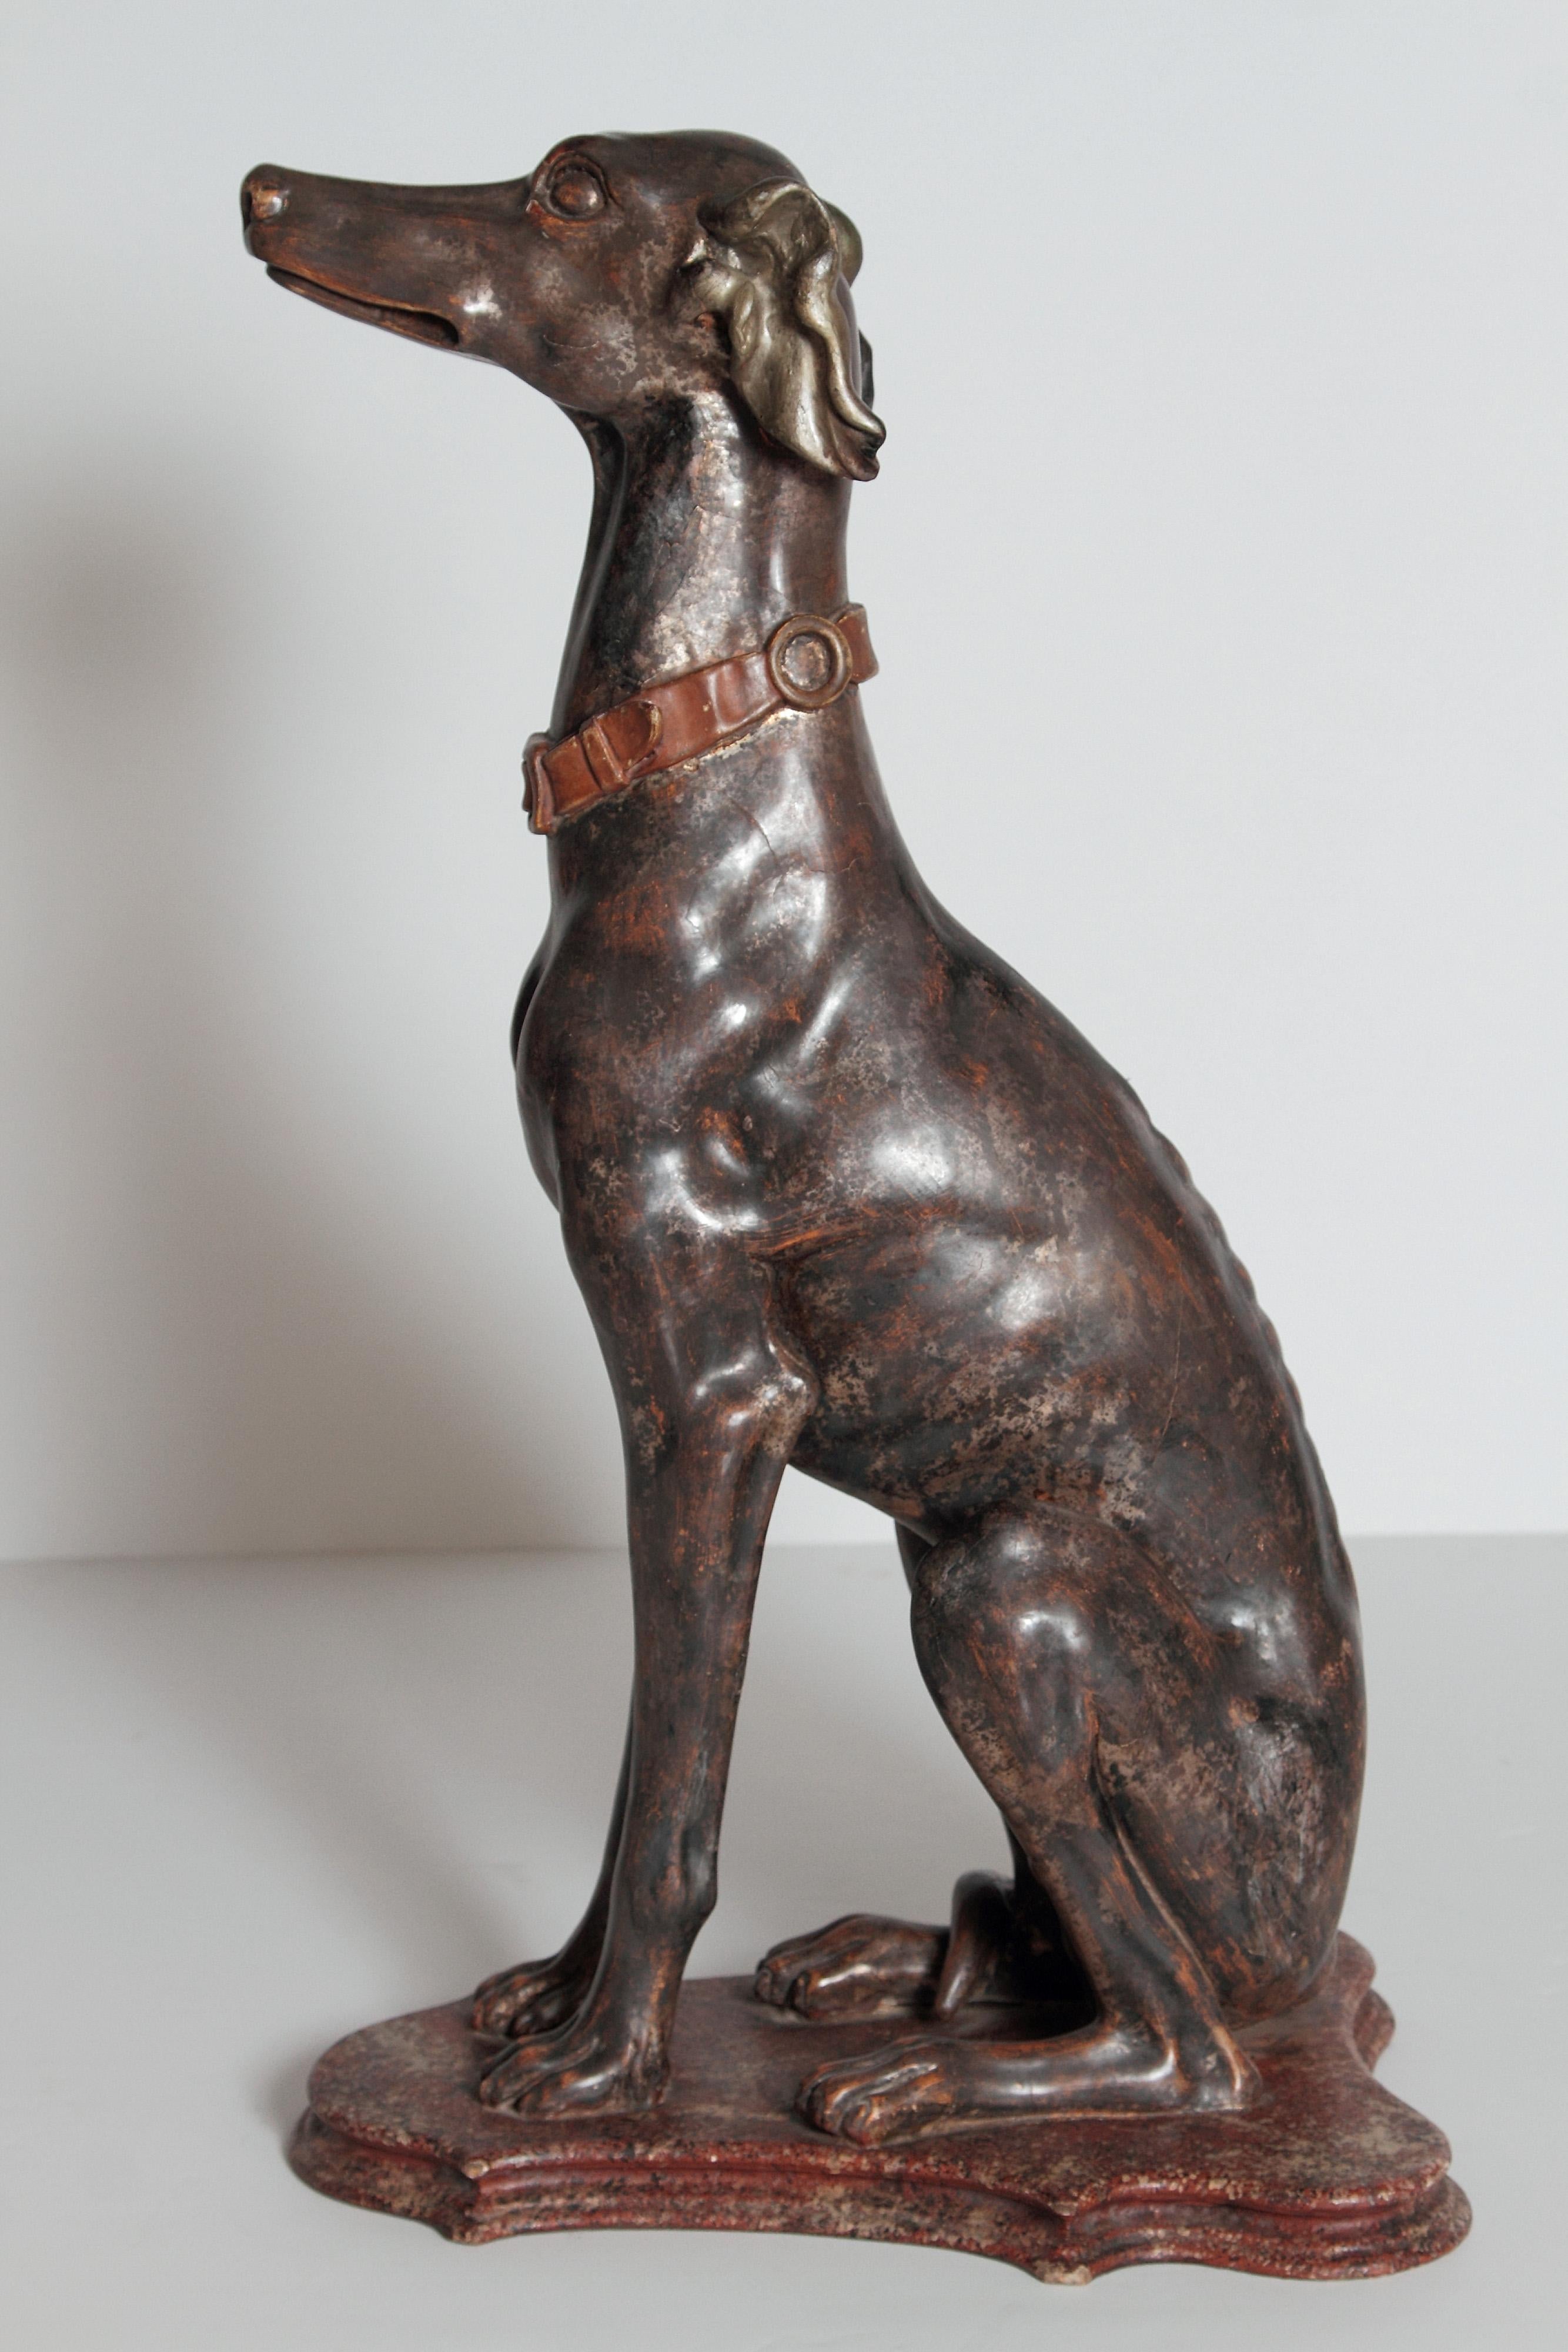 A fine example of a tall Italian greyhound sculpture from the 19th century. The greyhound is sitting attentively on a painted faux marble base. Painted in brown with skillful attention the head, ears, body and paws around which the tall is wrapped.